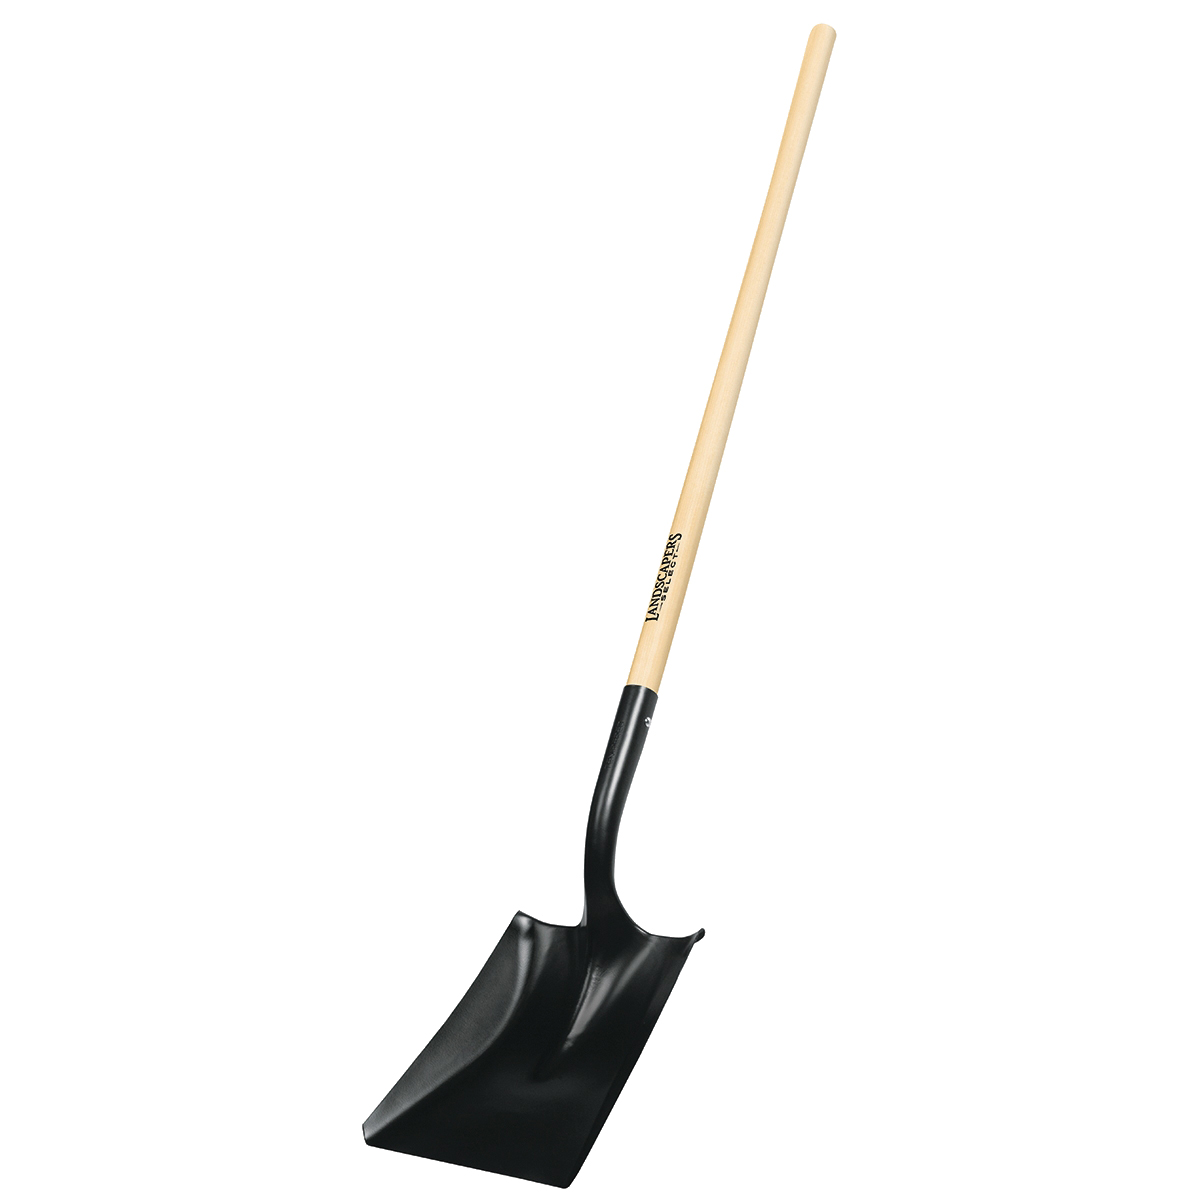 34609 PCL-P Square Point Shovel, Hardwood Handle, 45 in L Handle